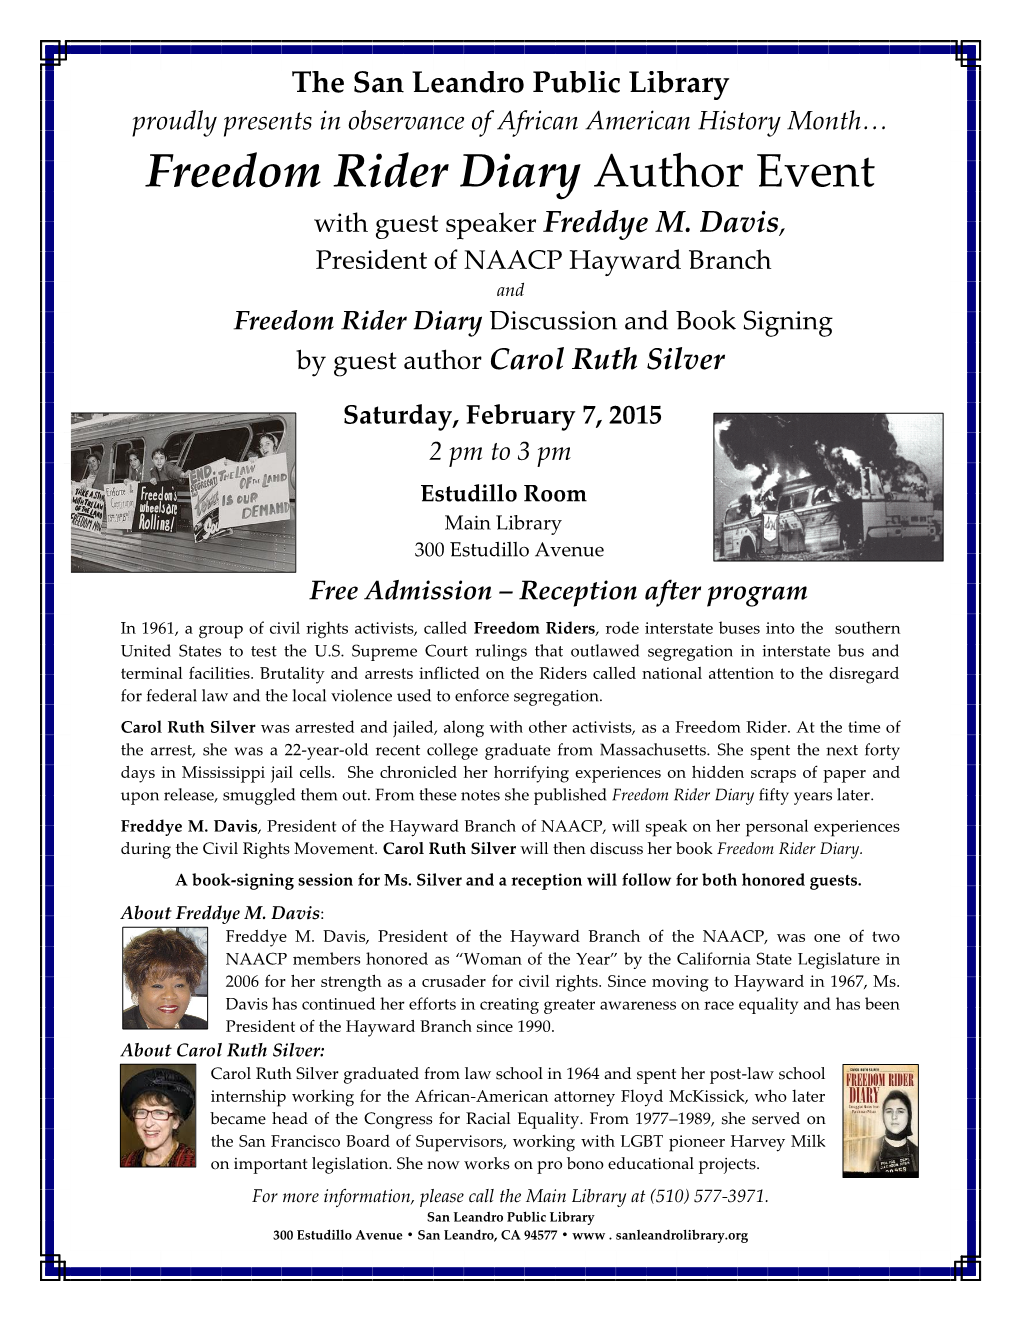 Freedom Rider Diary Author Event with Guest Speaker Freddye M